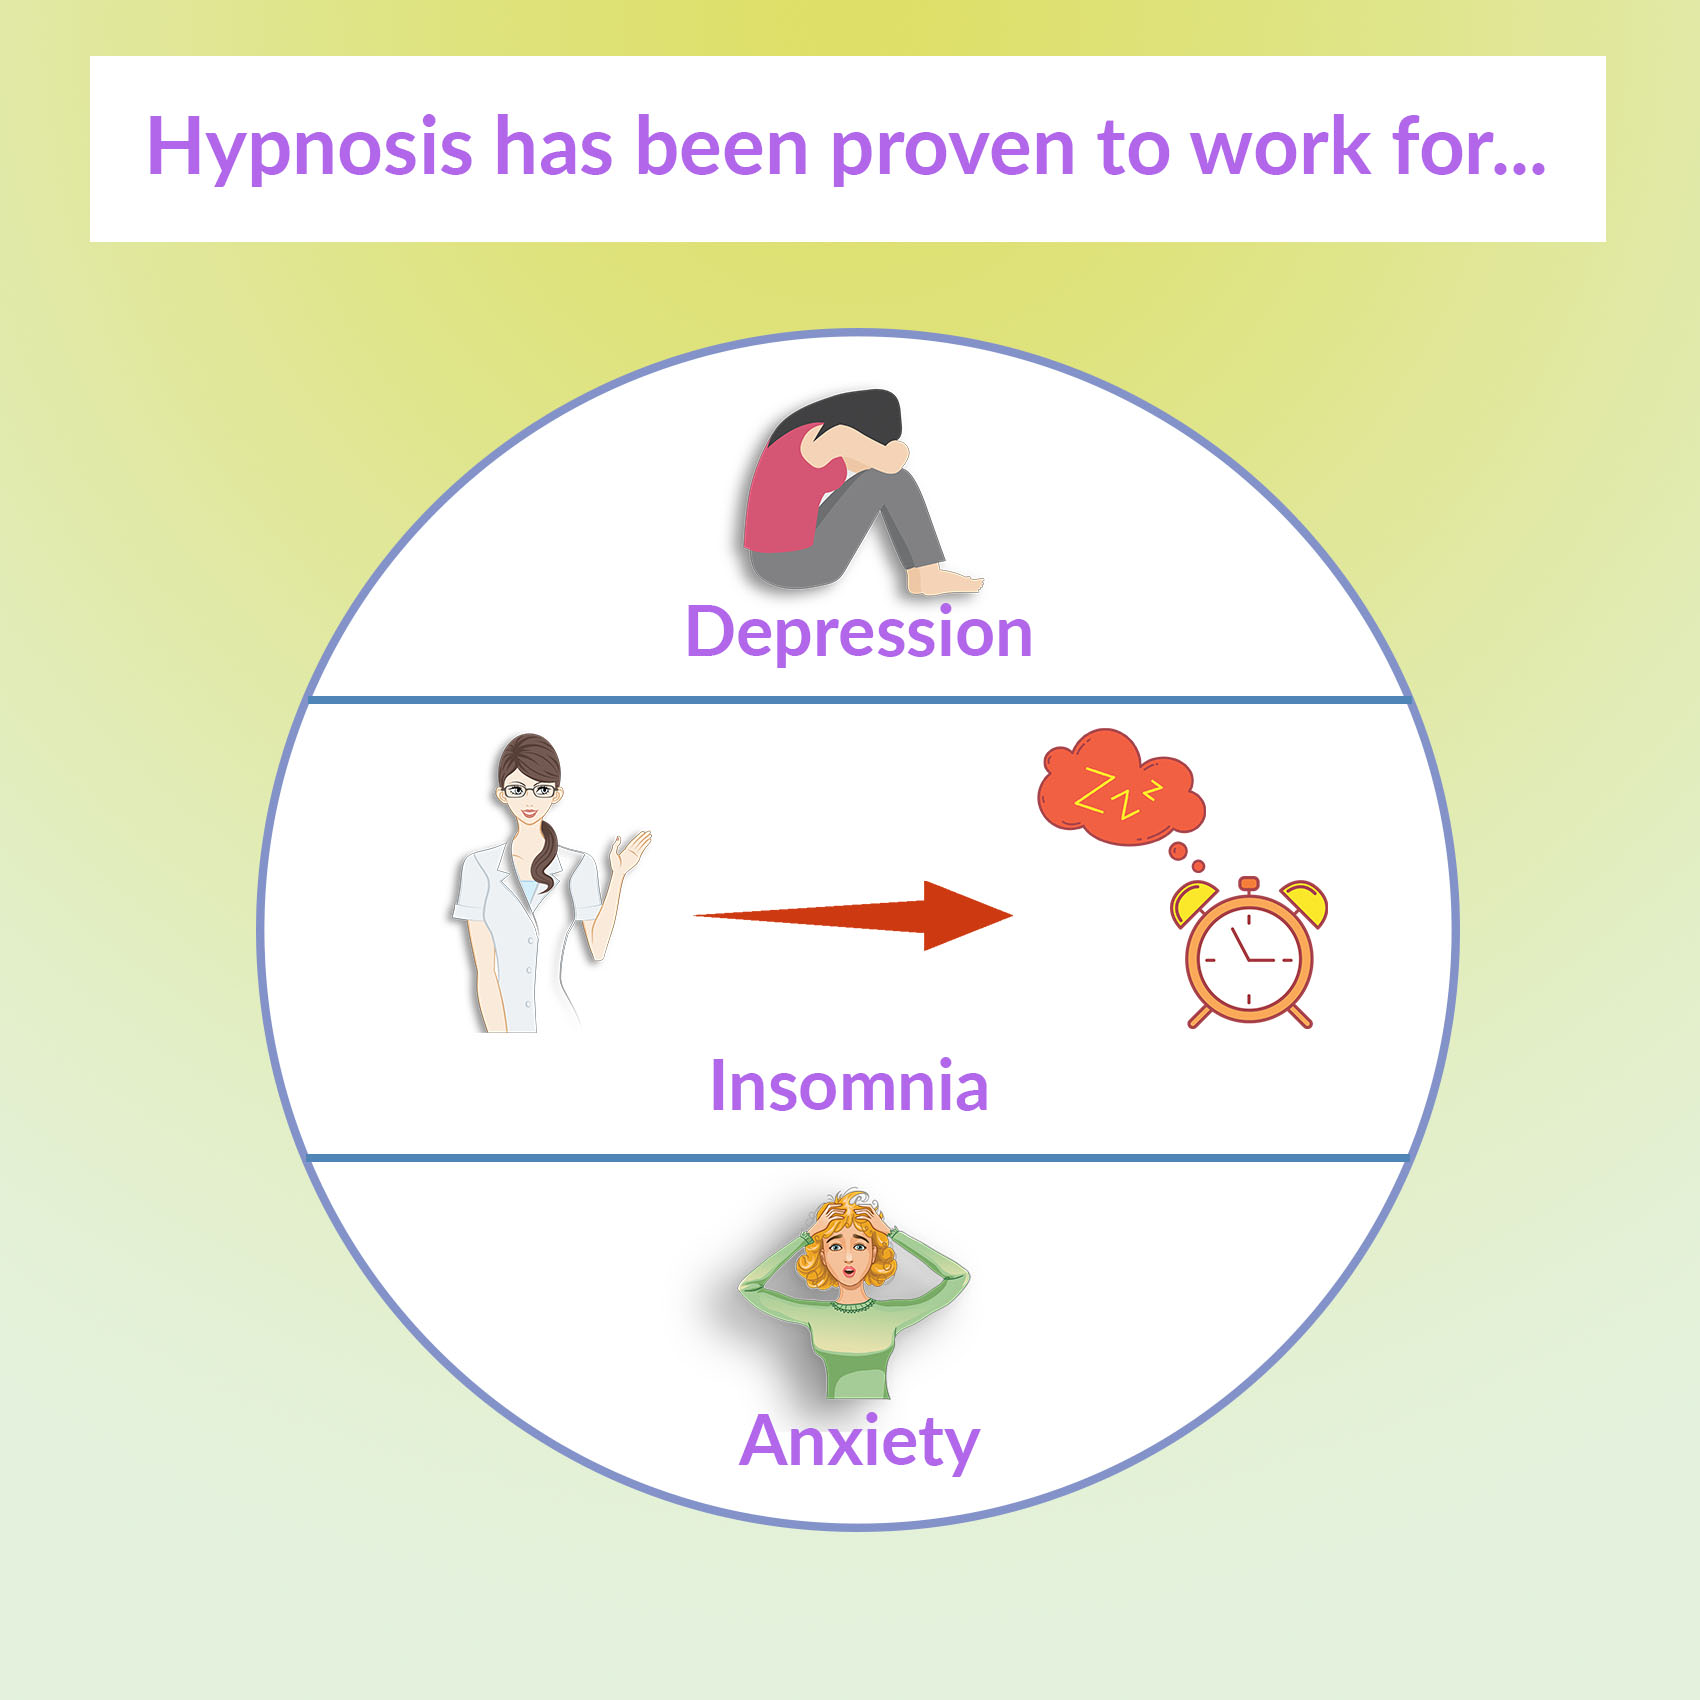 Proven articles that show hypnotherapy is effective and safe